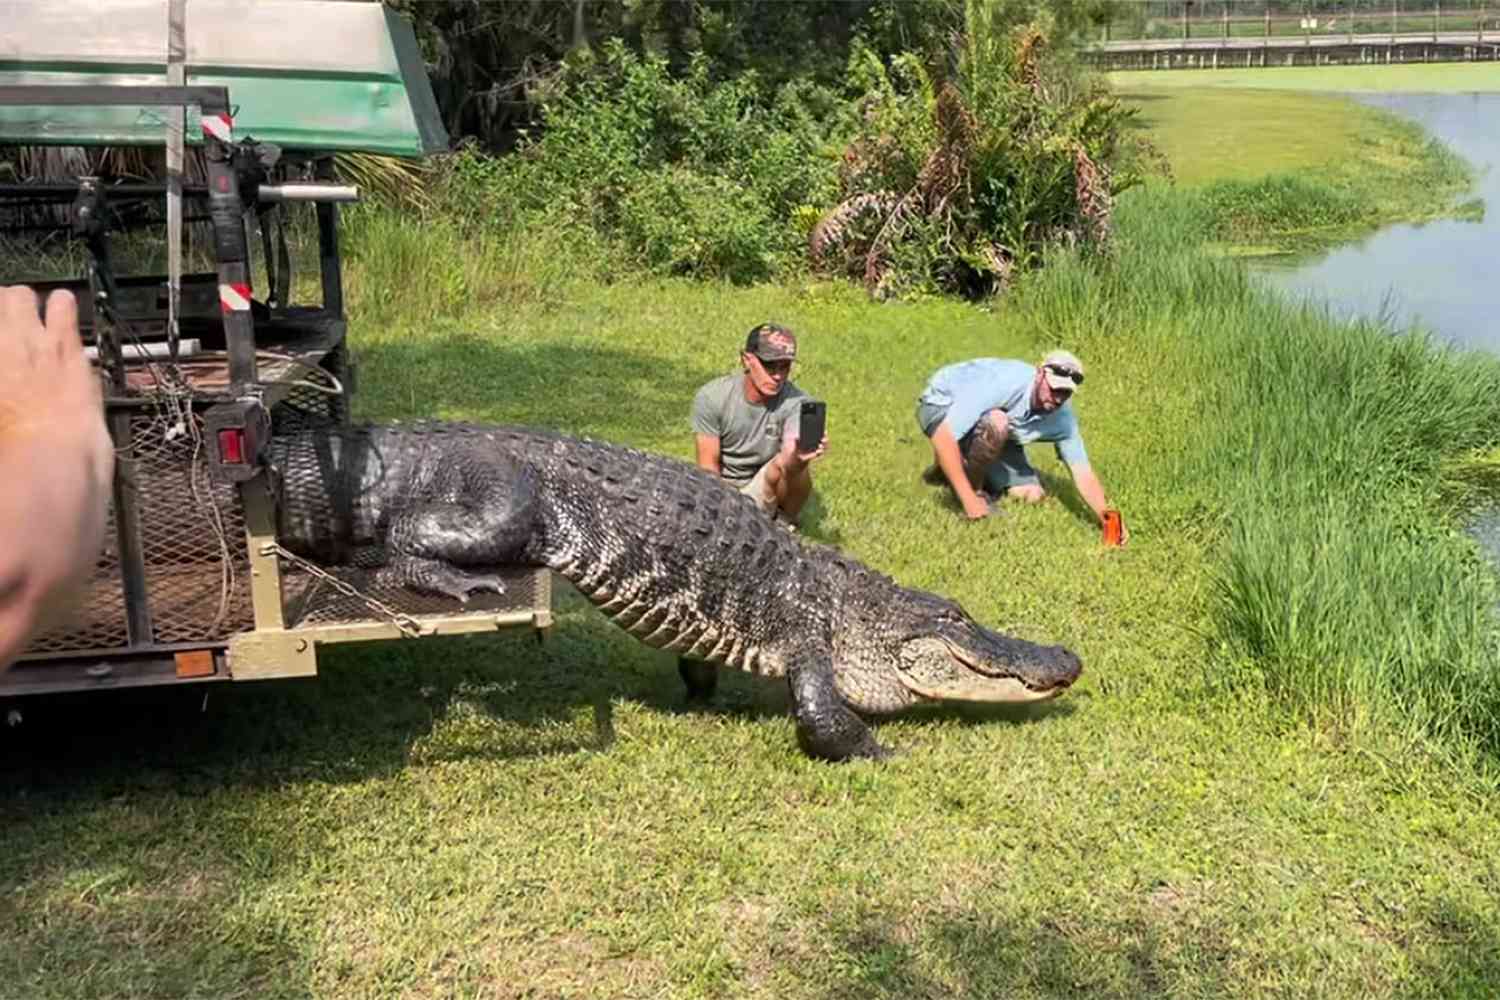 12-Foot Alligator Caught Blocking Planes at Air Force Base Returns to Cause Chaos After Relocation